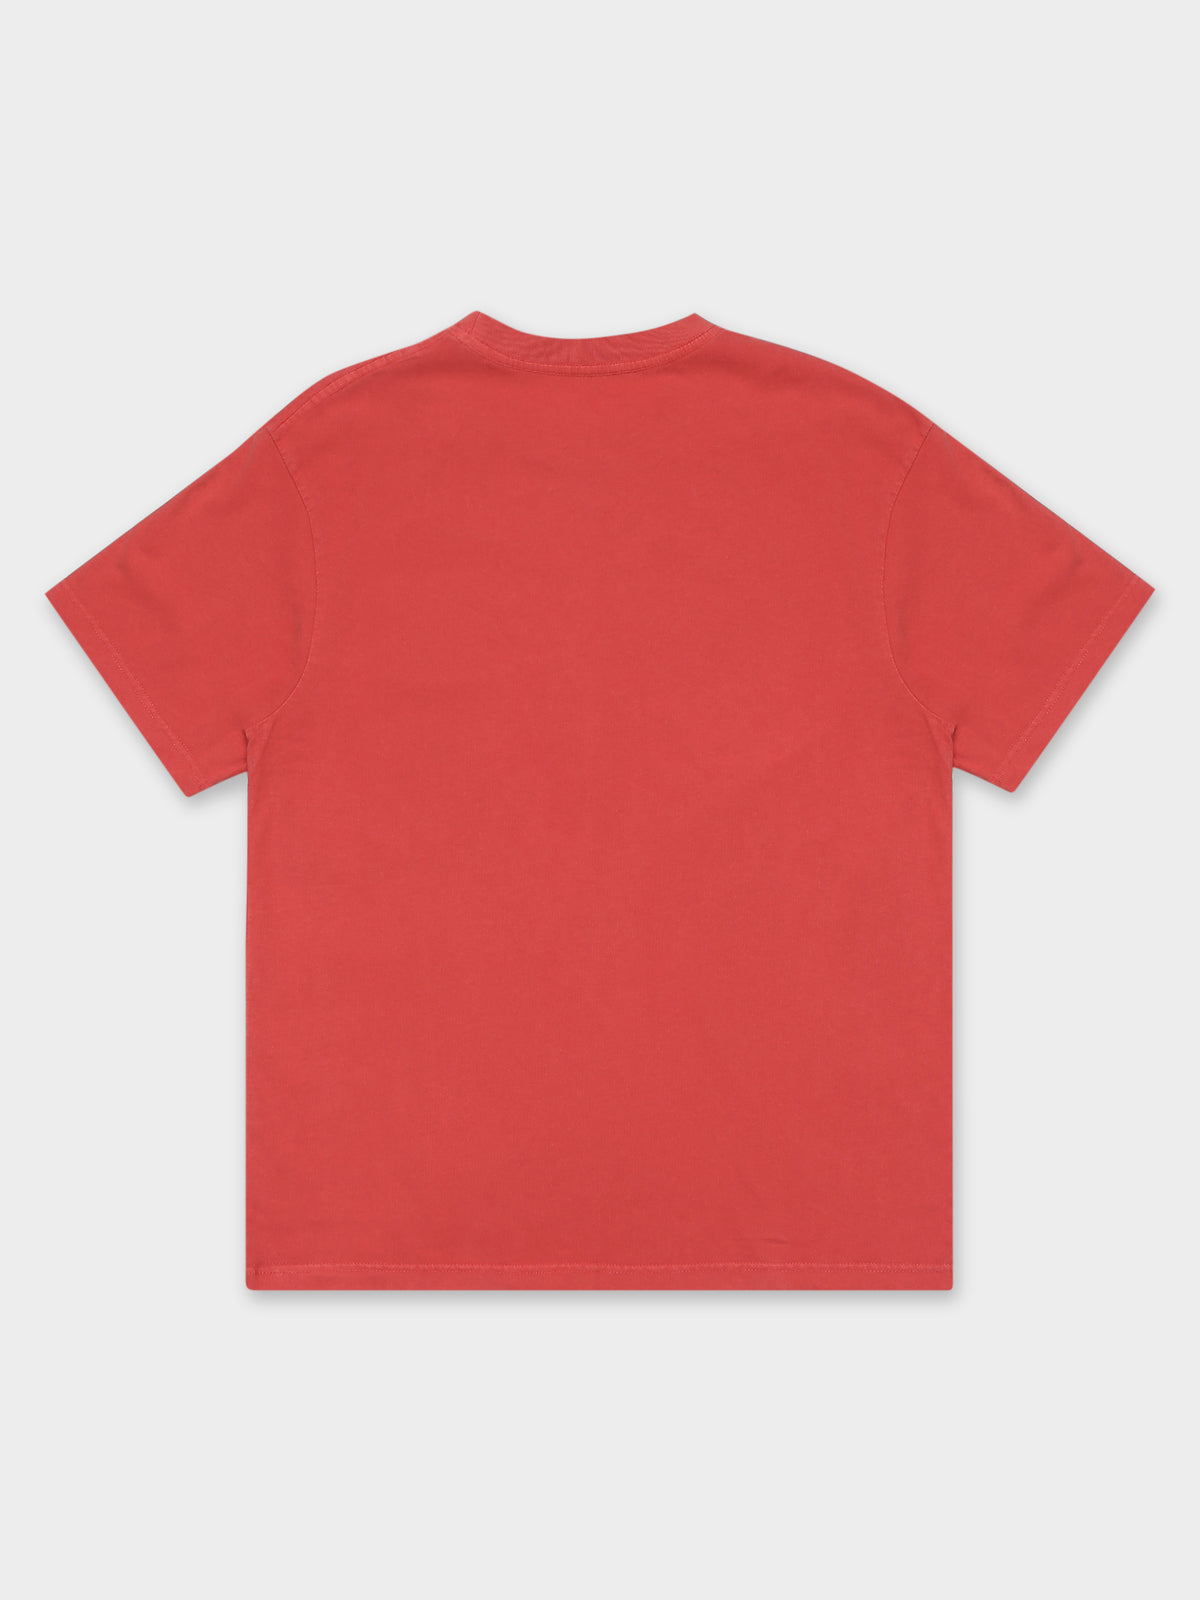 Chicago Bulls T-Shirt in Red